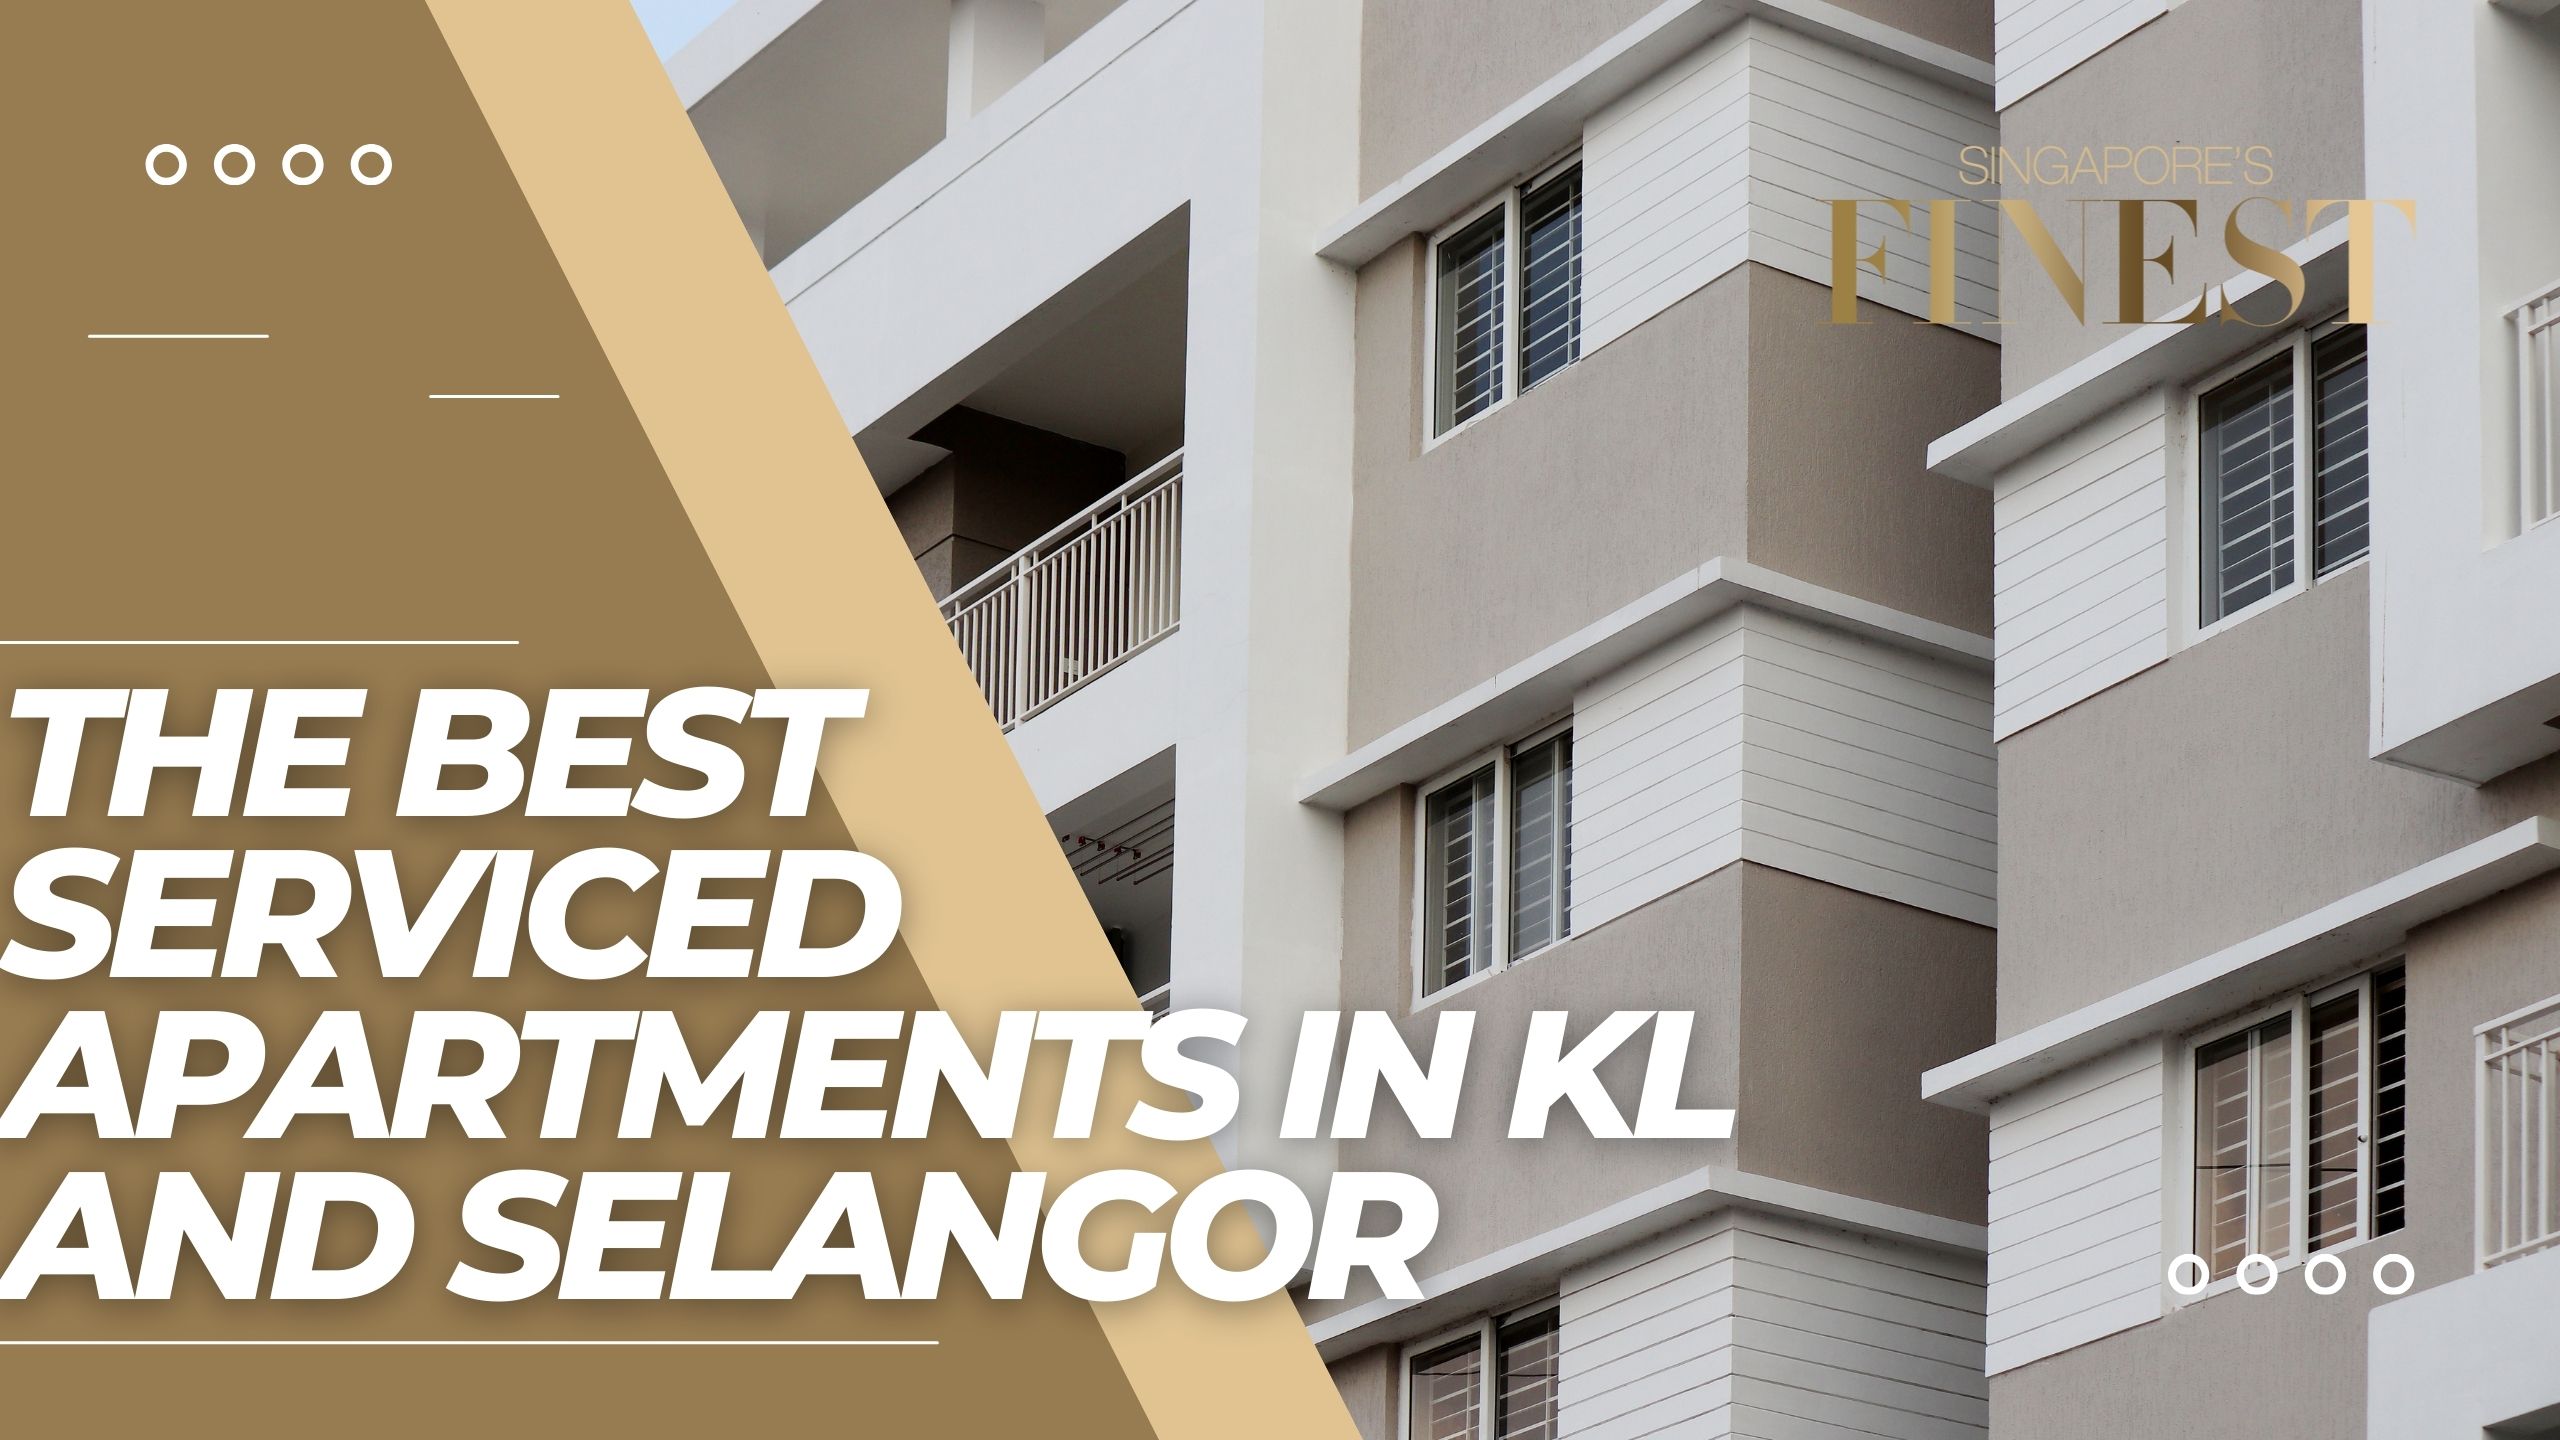 The Finest Serviced Apartments in KL and Selangor